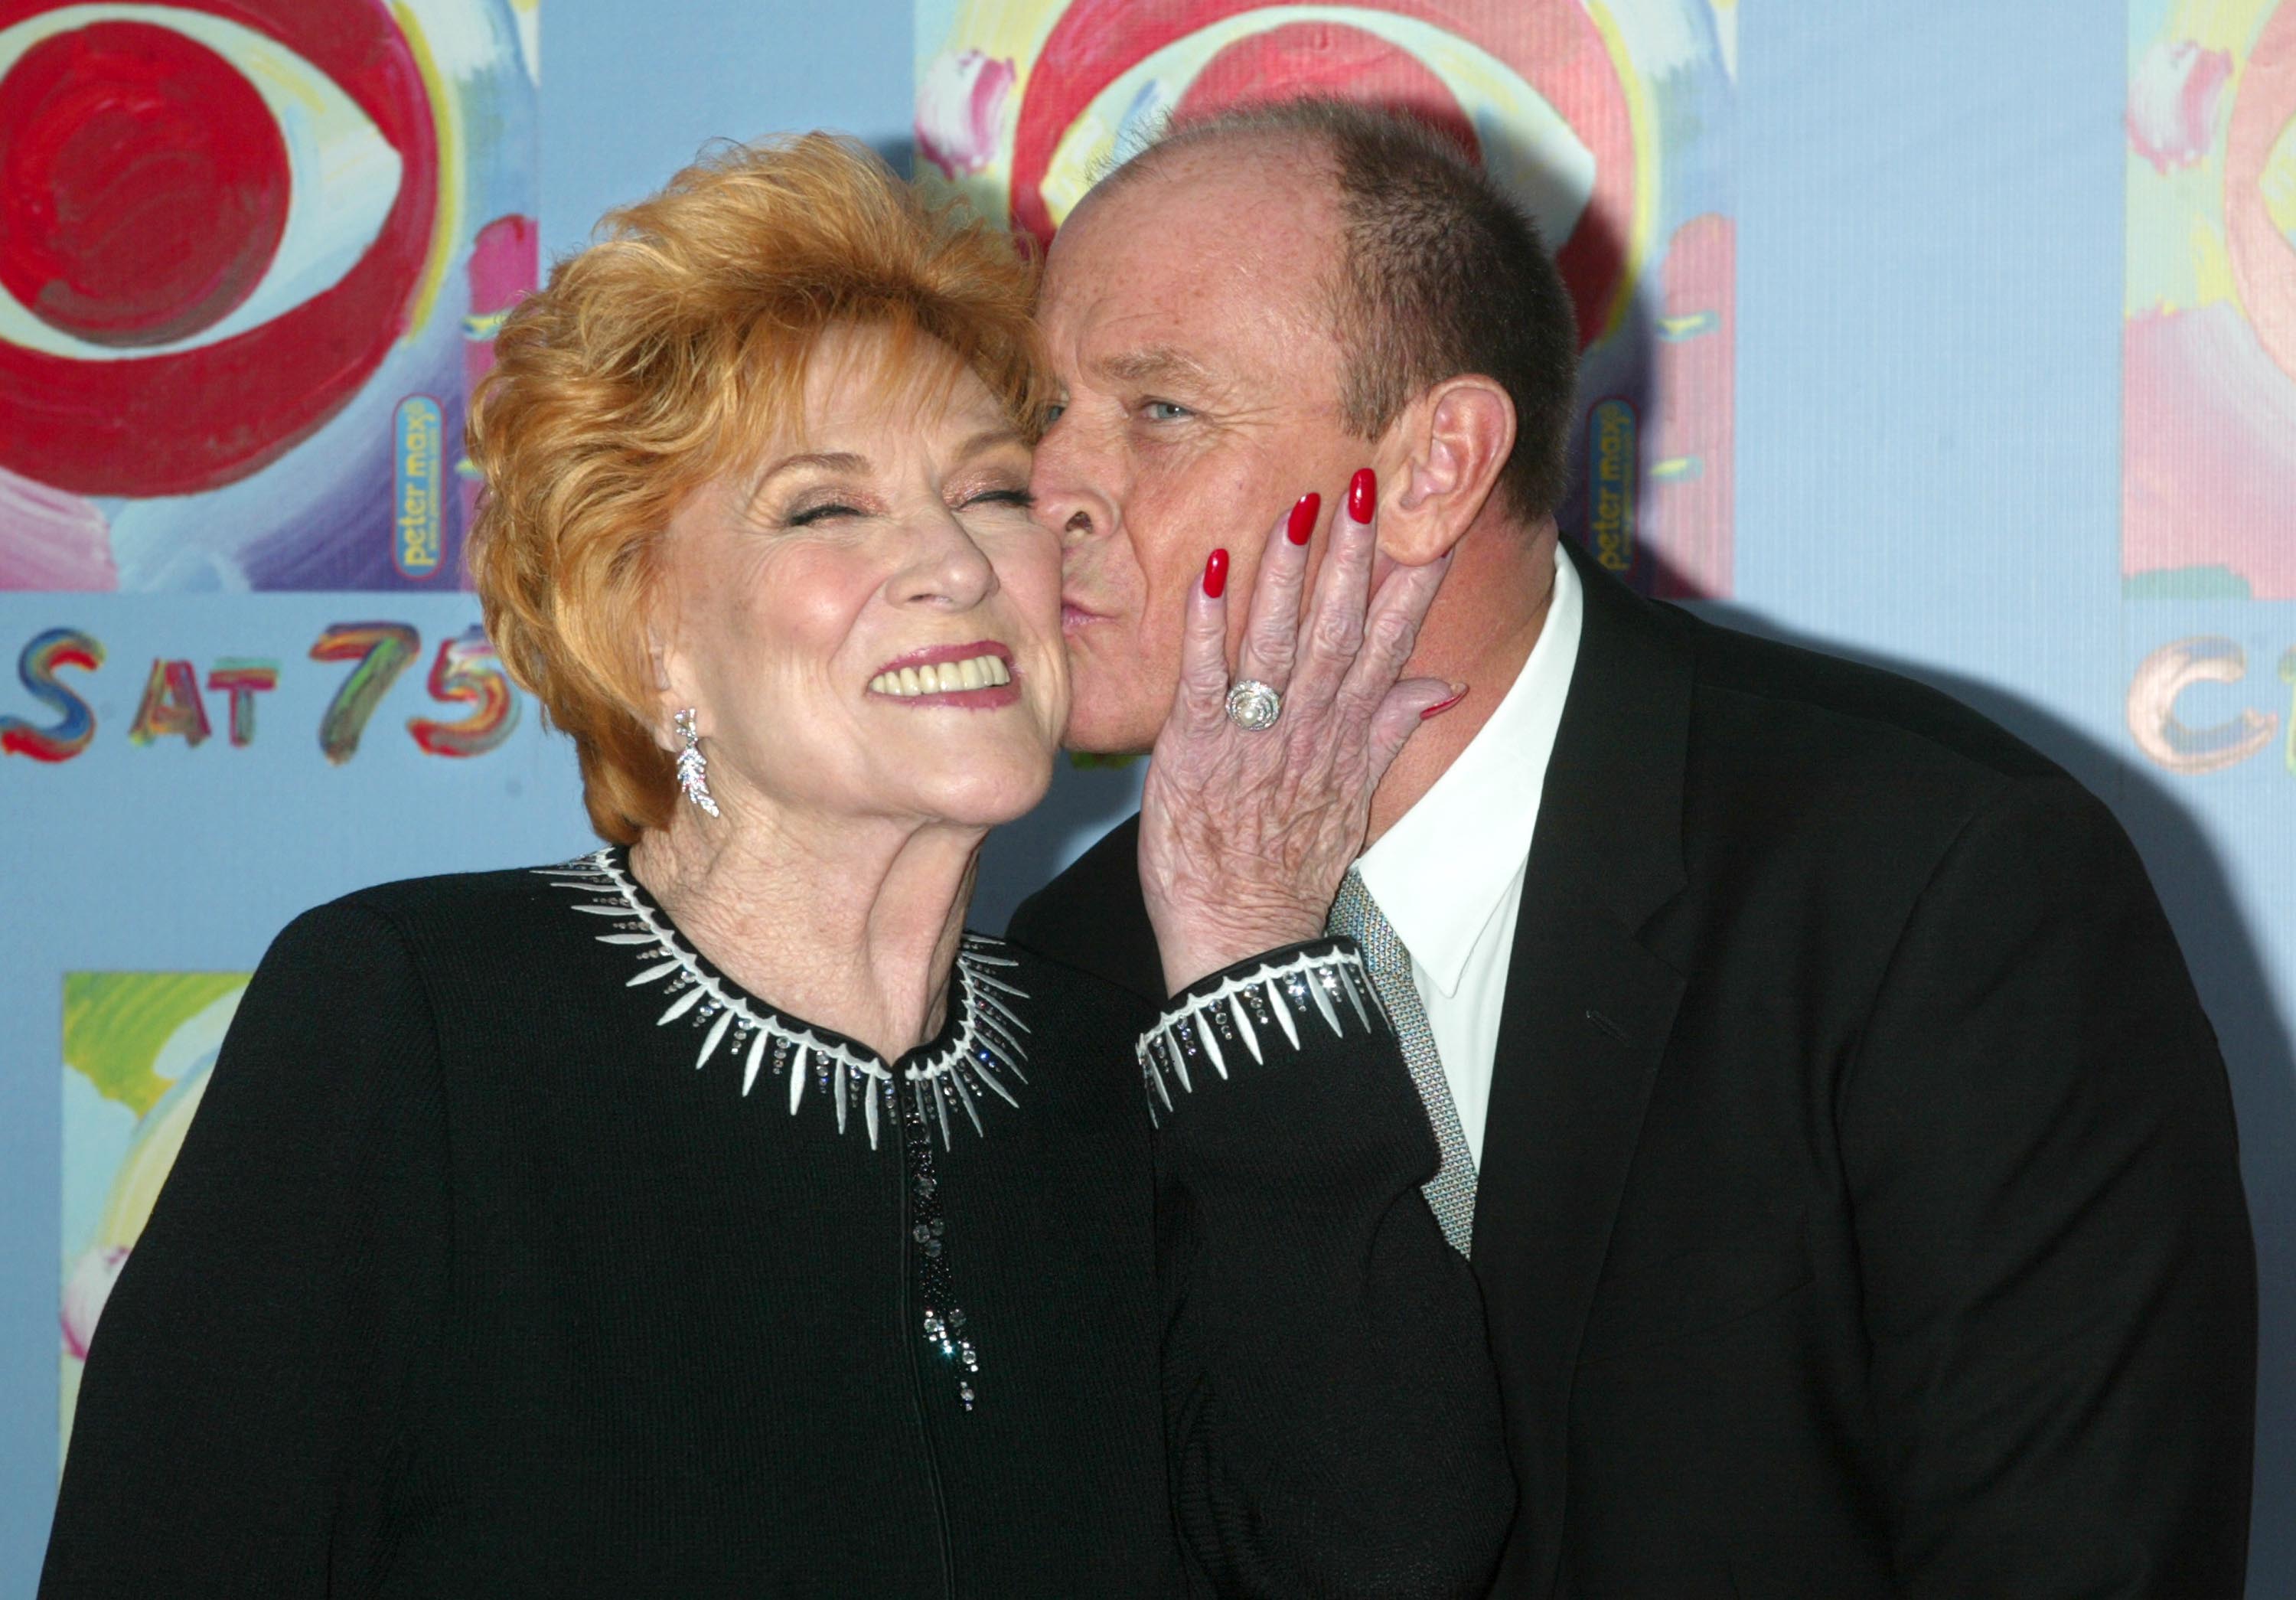 Jeanne Cooper and Corbin Bernsen during "CBS at 75" at Hammerstein Ballroom in New York City | Source: Getty Images